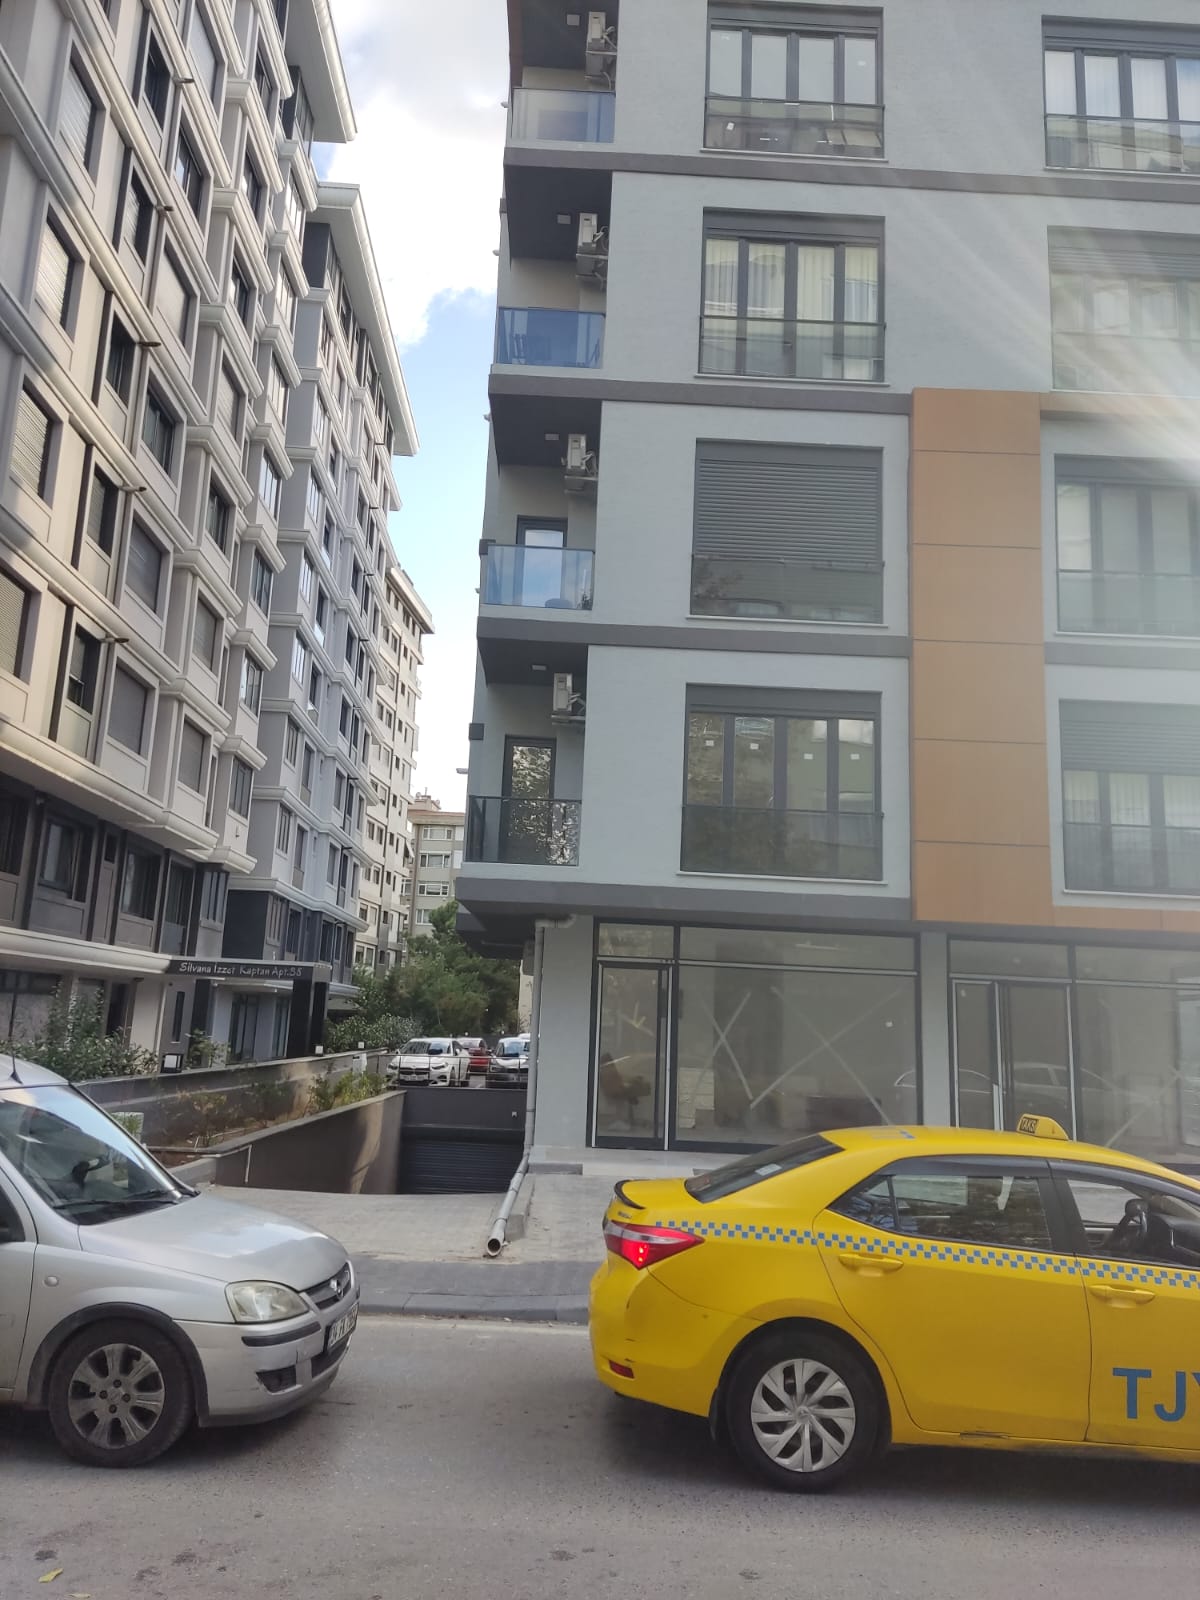 2+1 Apartment for Sale in Erenköy, Istanbul, Eligible for Citizenship, 1 Minute to the Marmara Sea, Excellent Location,